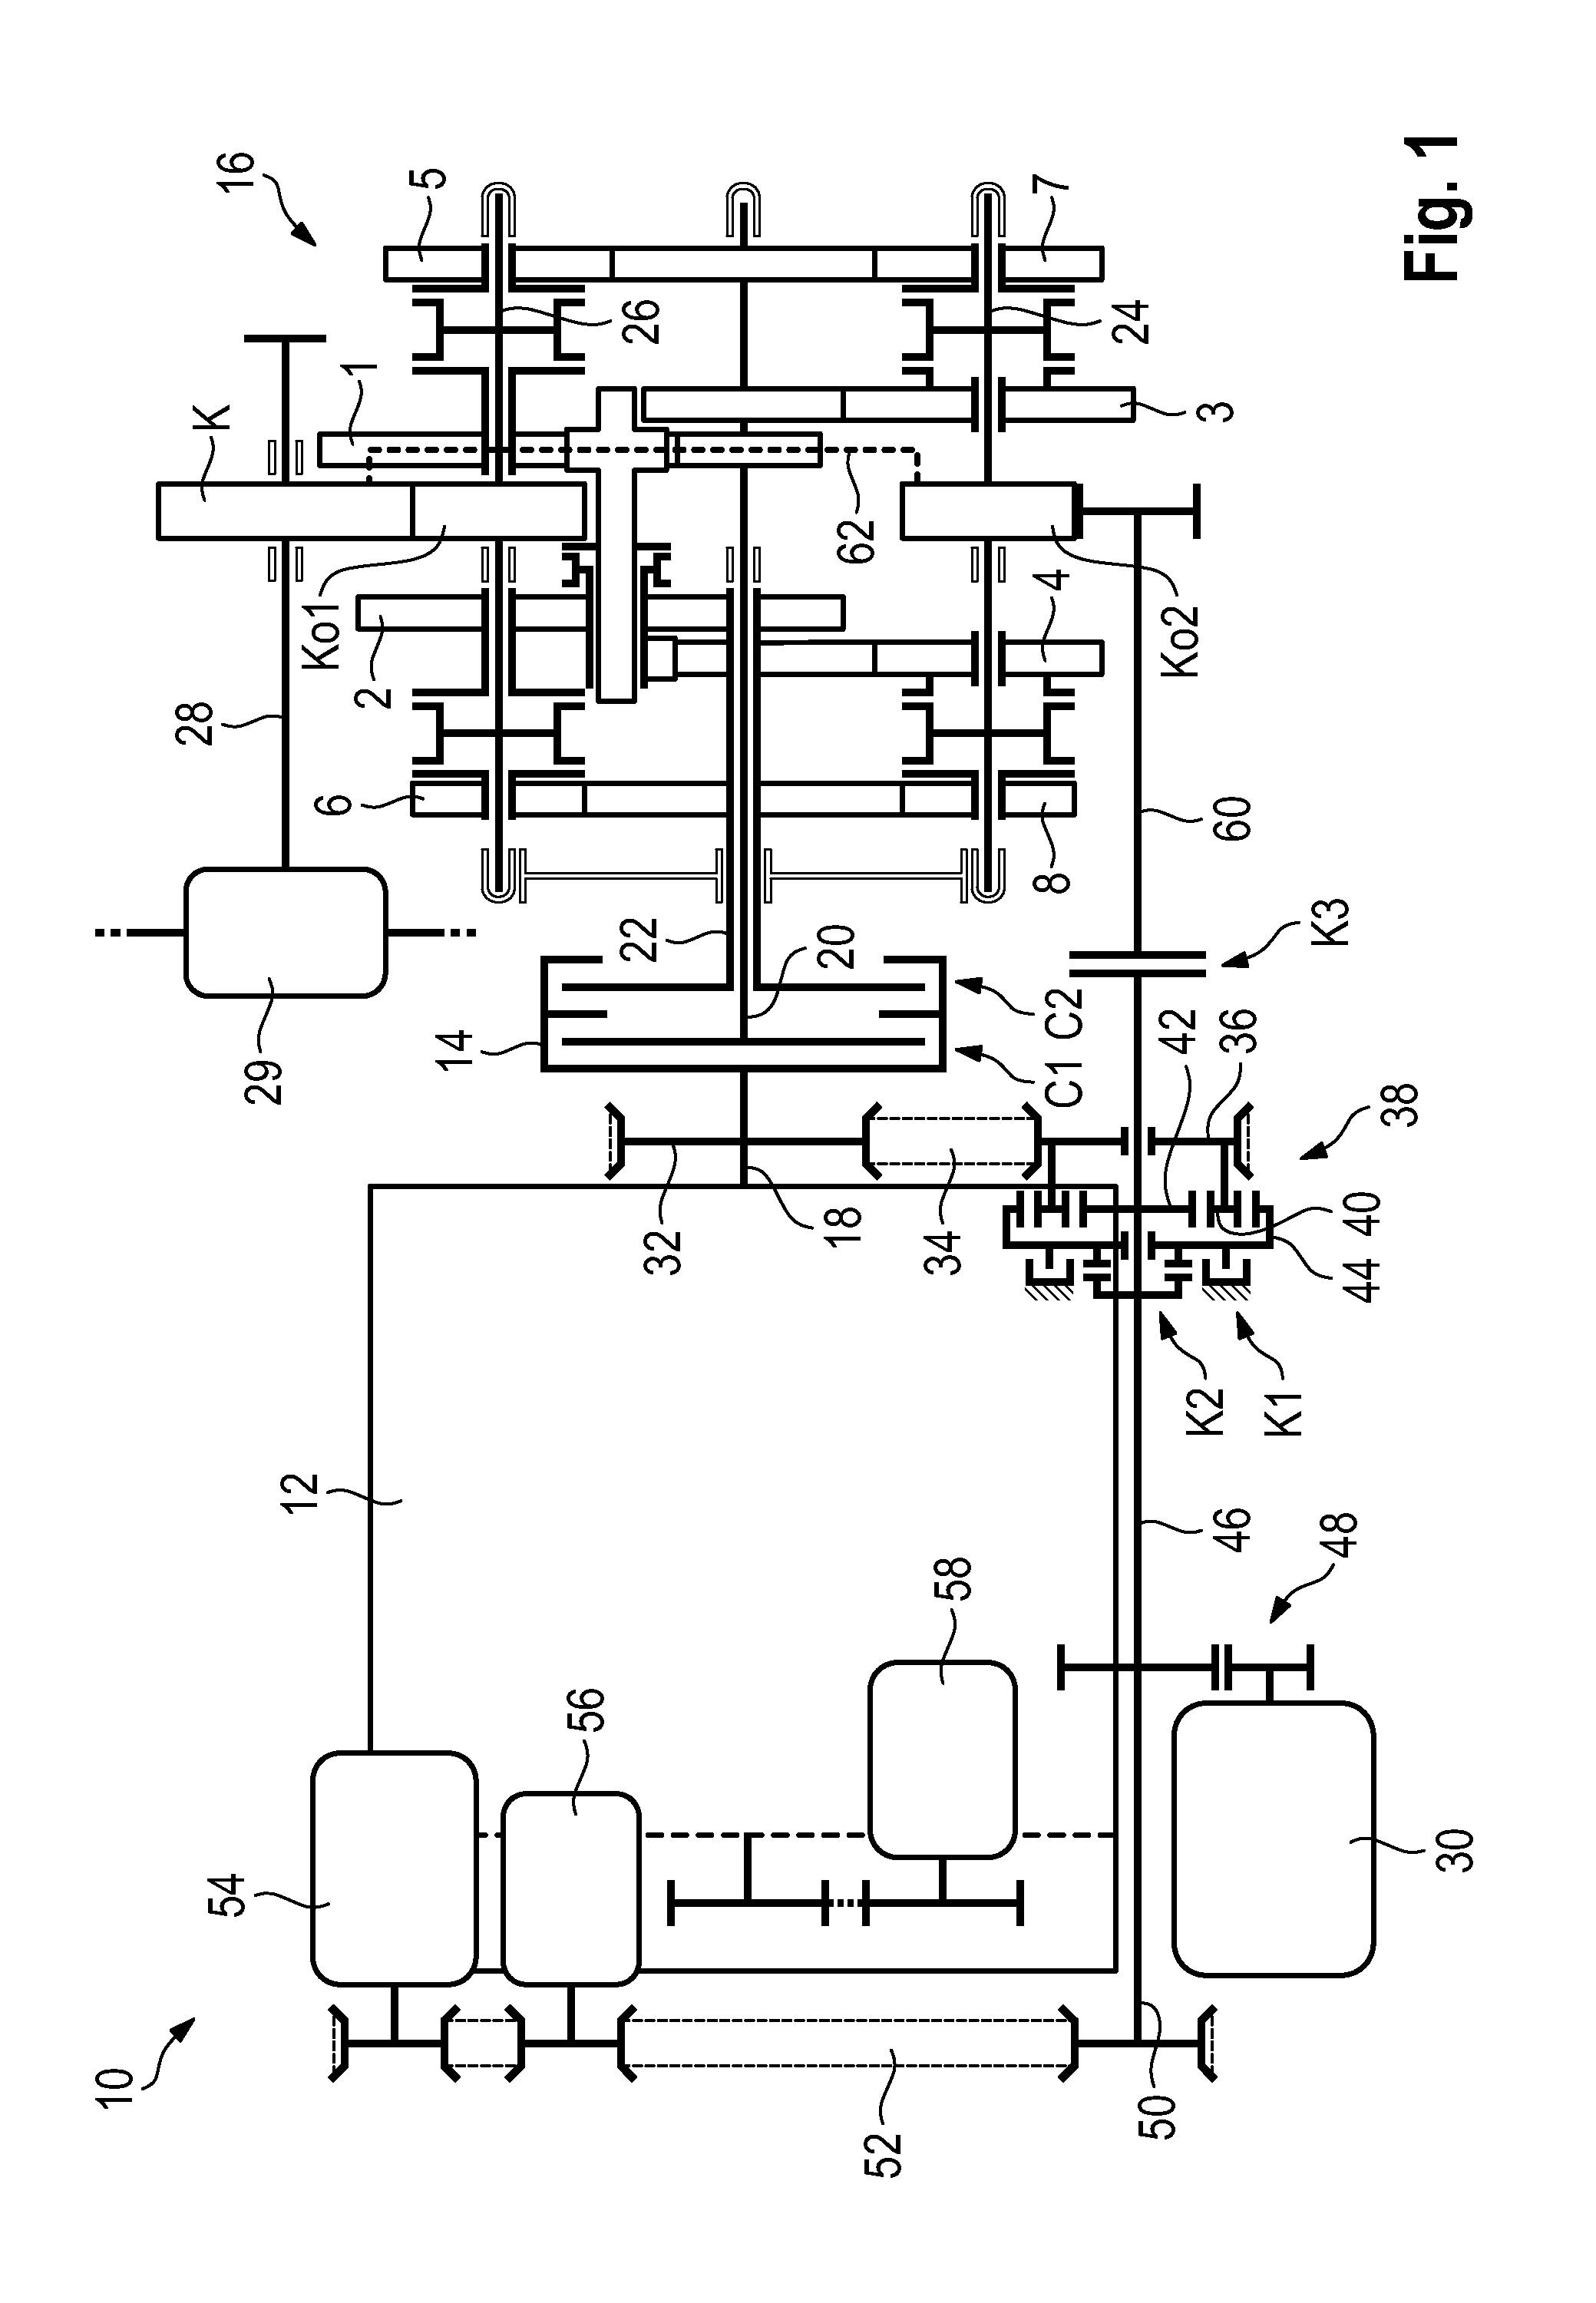 Drive train for a hybrid motor vehicle